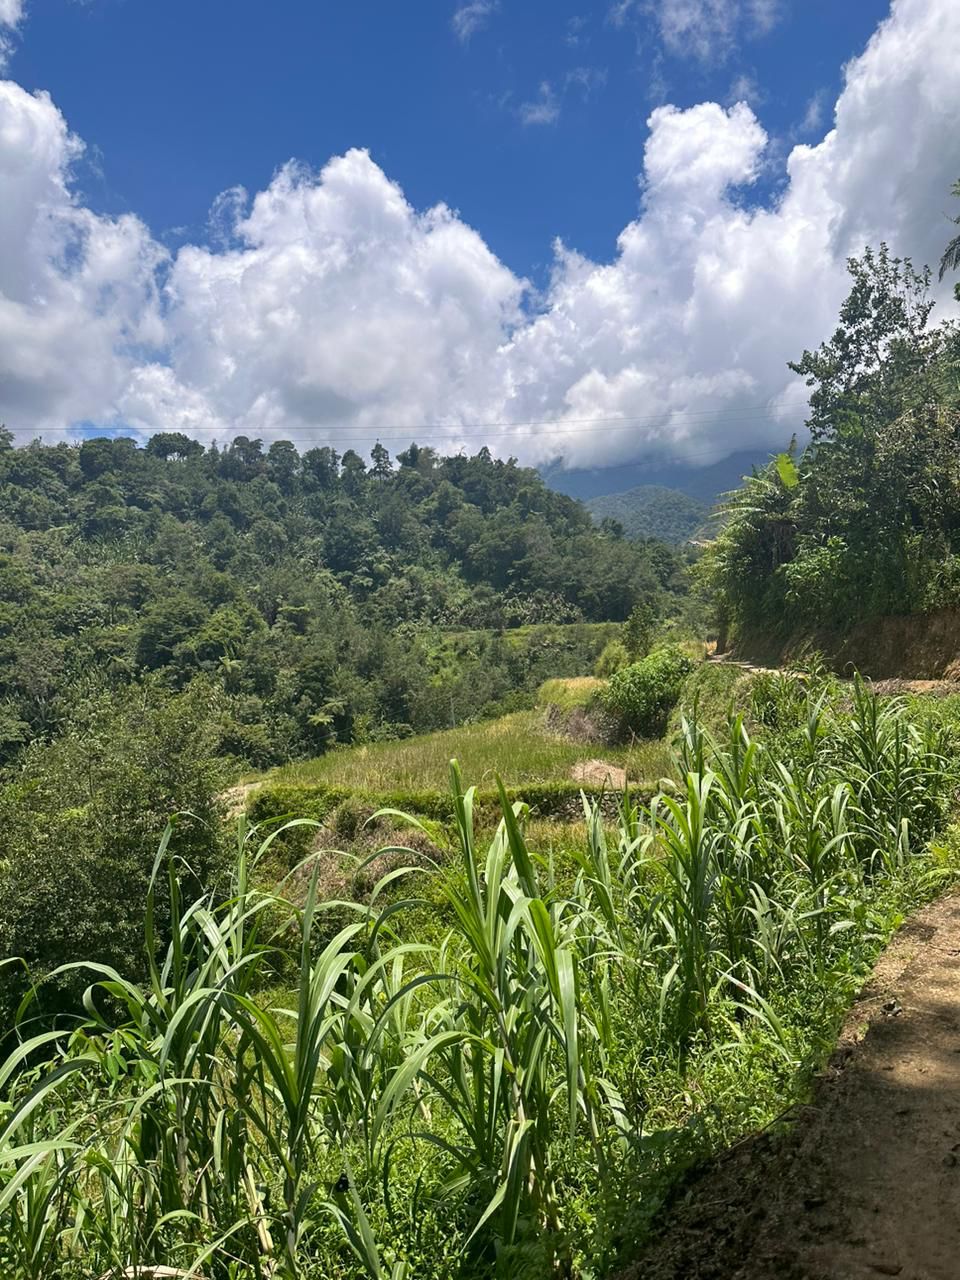 The Philippines countryside